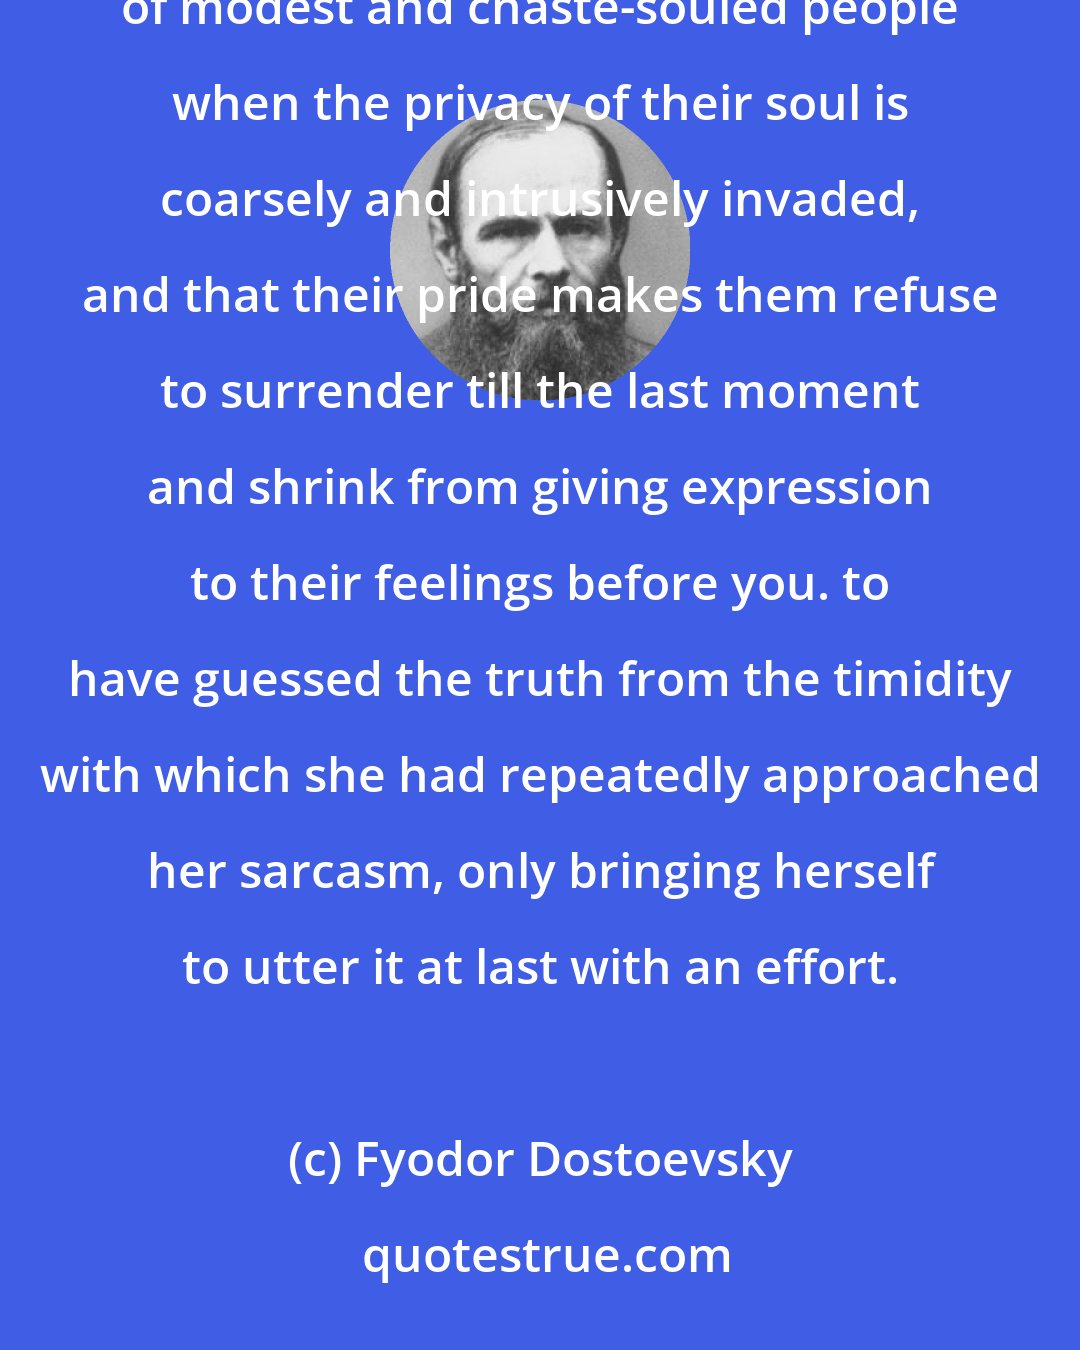 Fyodor Dostoevsky: I did not understand that she was hiding her feelings under irony, that this is usually the last refuge of modest and chaste-souled people when the privacy of their soul is coarsely and intrusively invaded, and that their pride makes them refuse to surrender till the last moment and shrink from giving expression to their feelings before you. to have guessed the truth from the timidity with which she had repeatedly approached her sarcasm, only bringing herself to utter it at last with an effort.